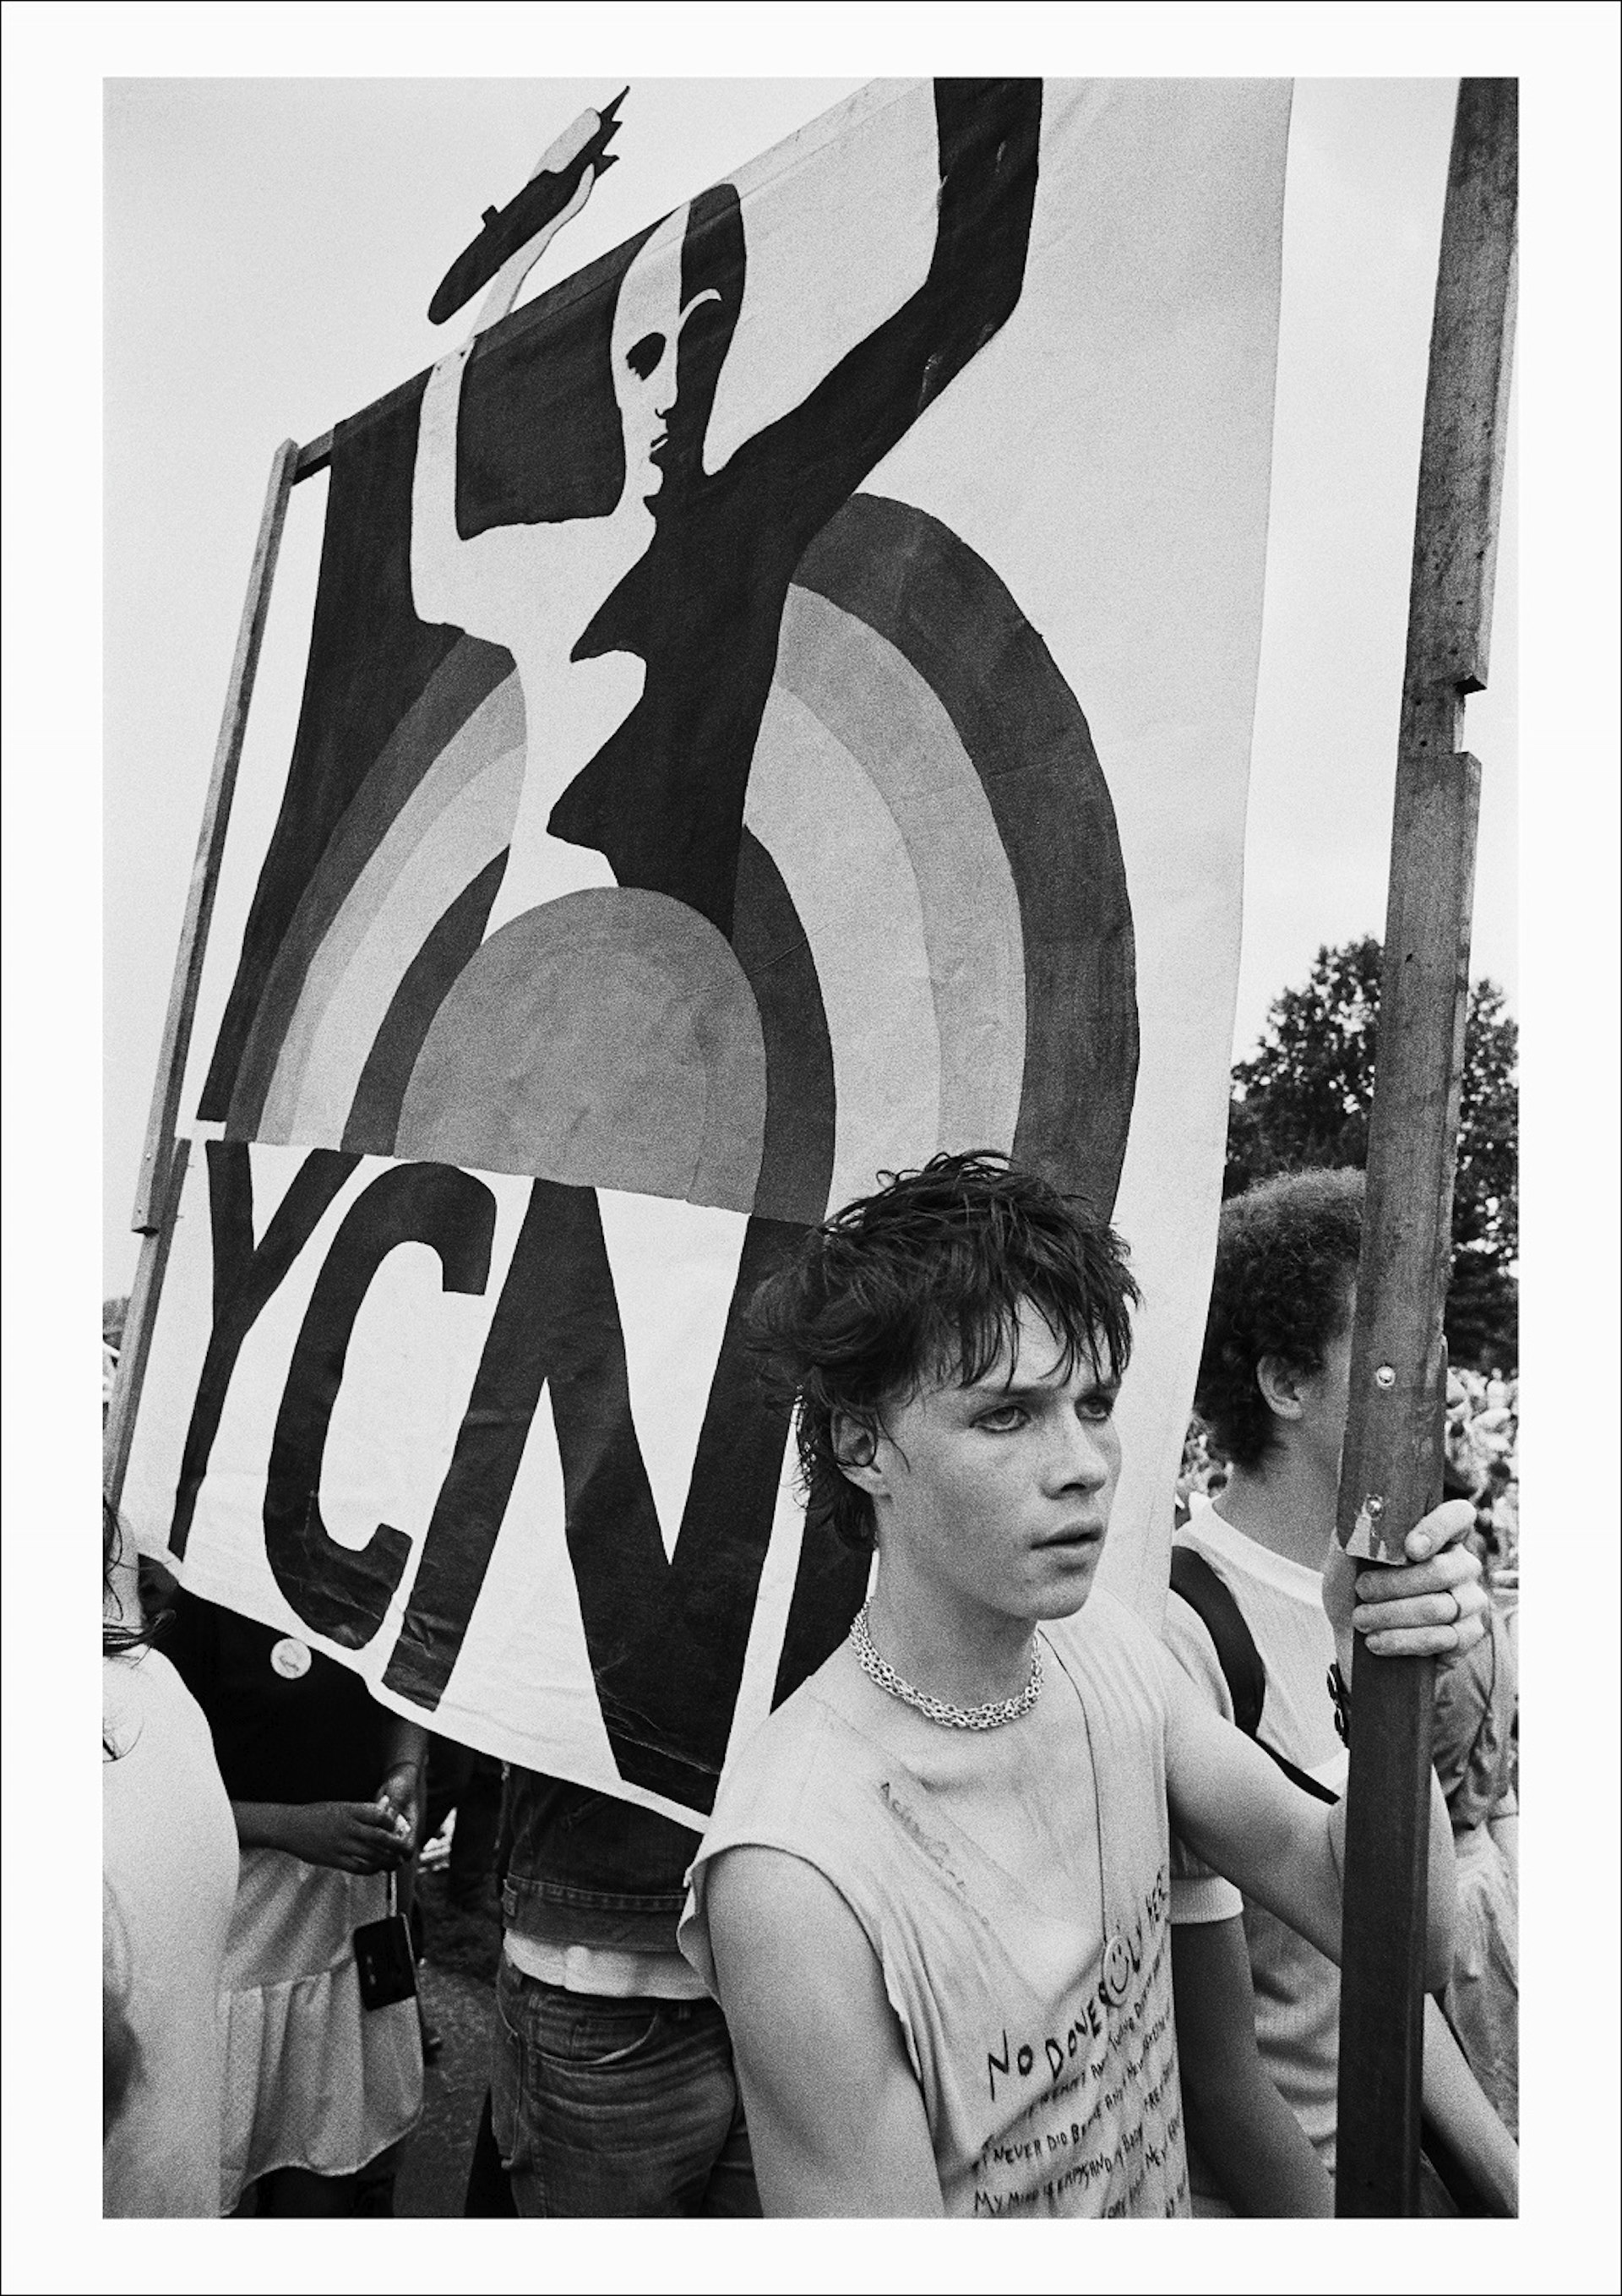 CND march and rally, Hyde Park, London, 1982